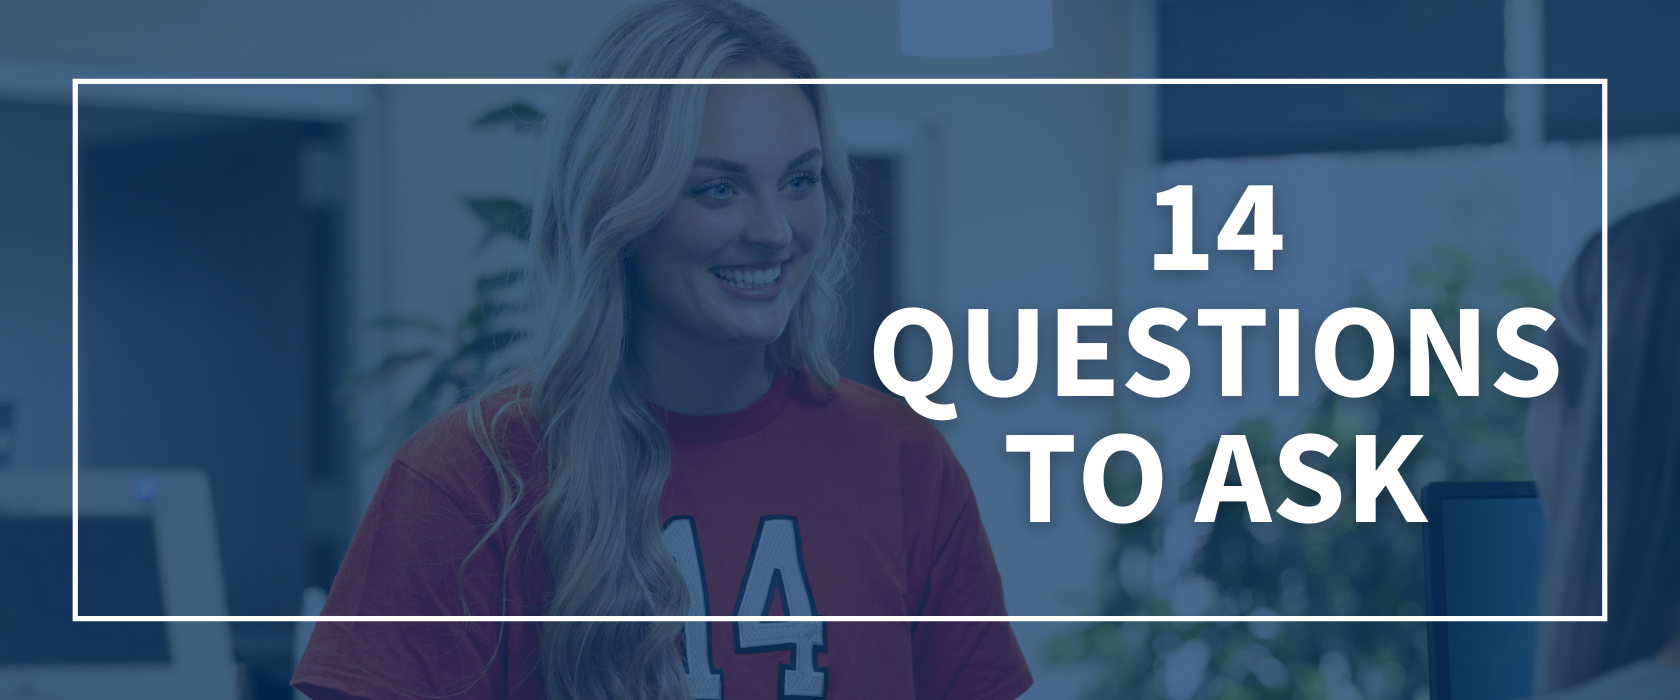 14 Questions to Ask